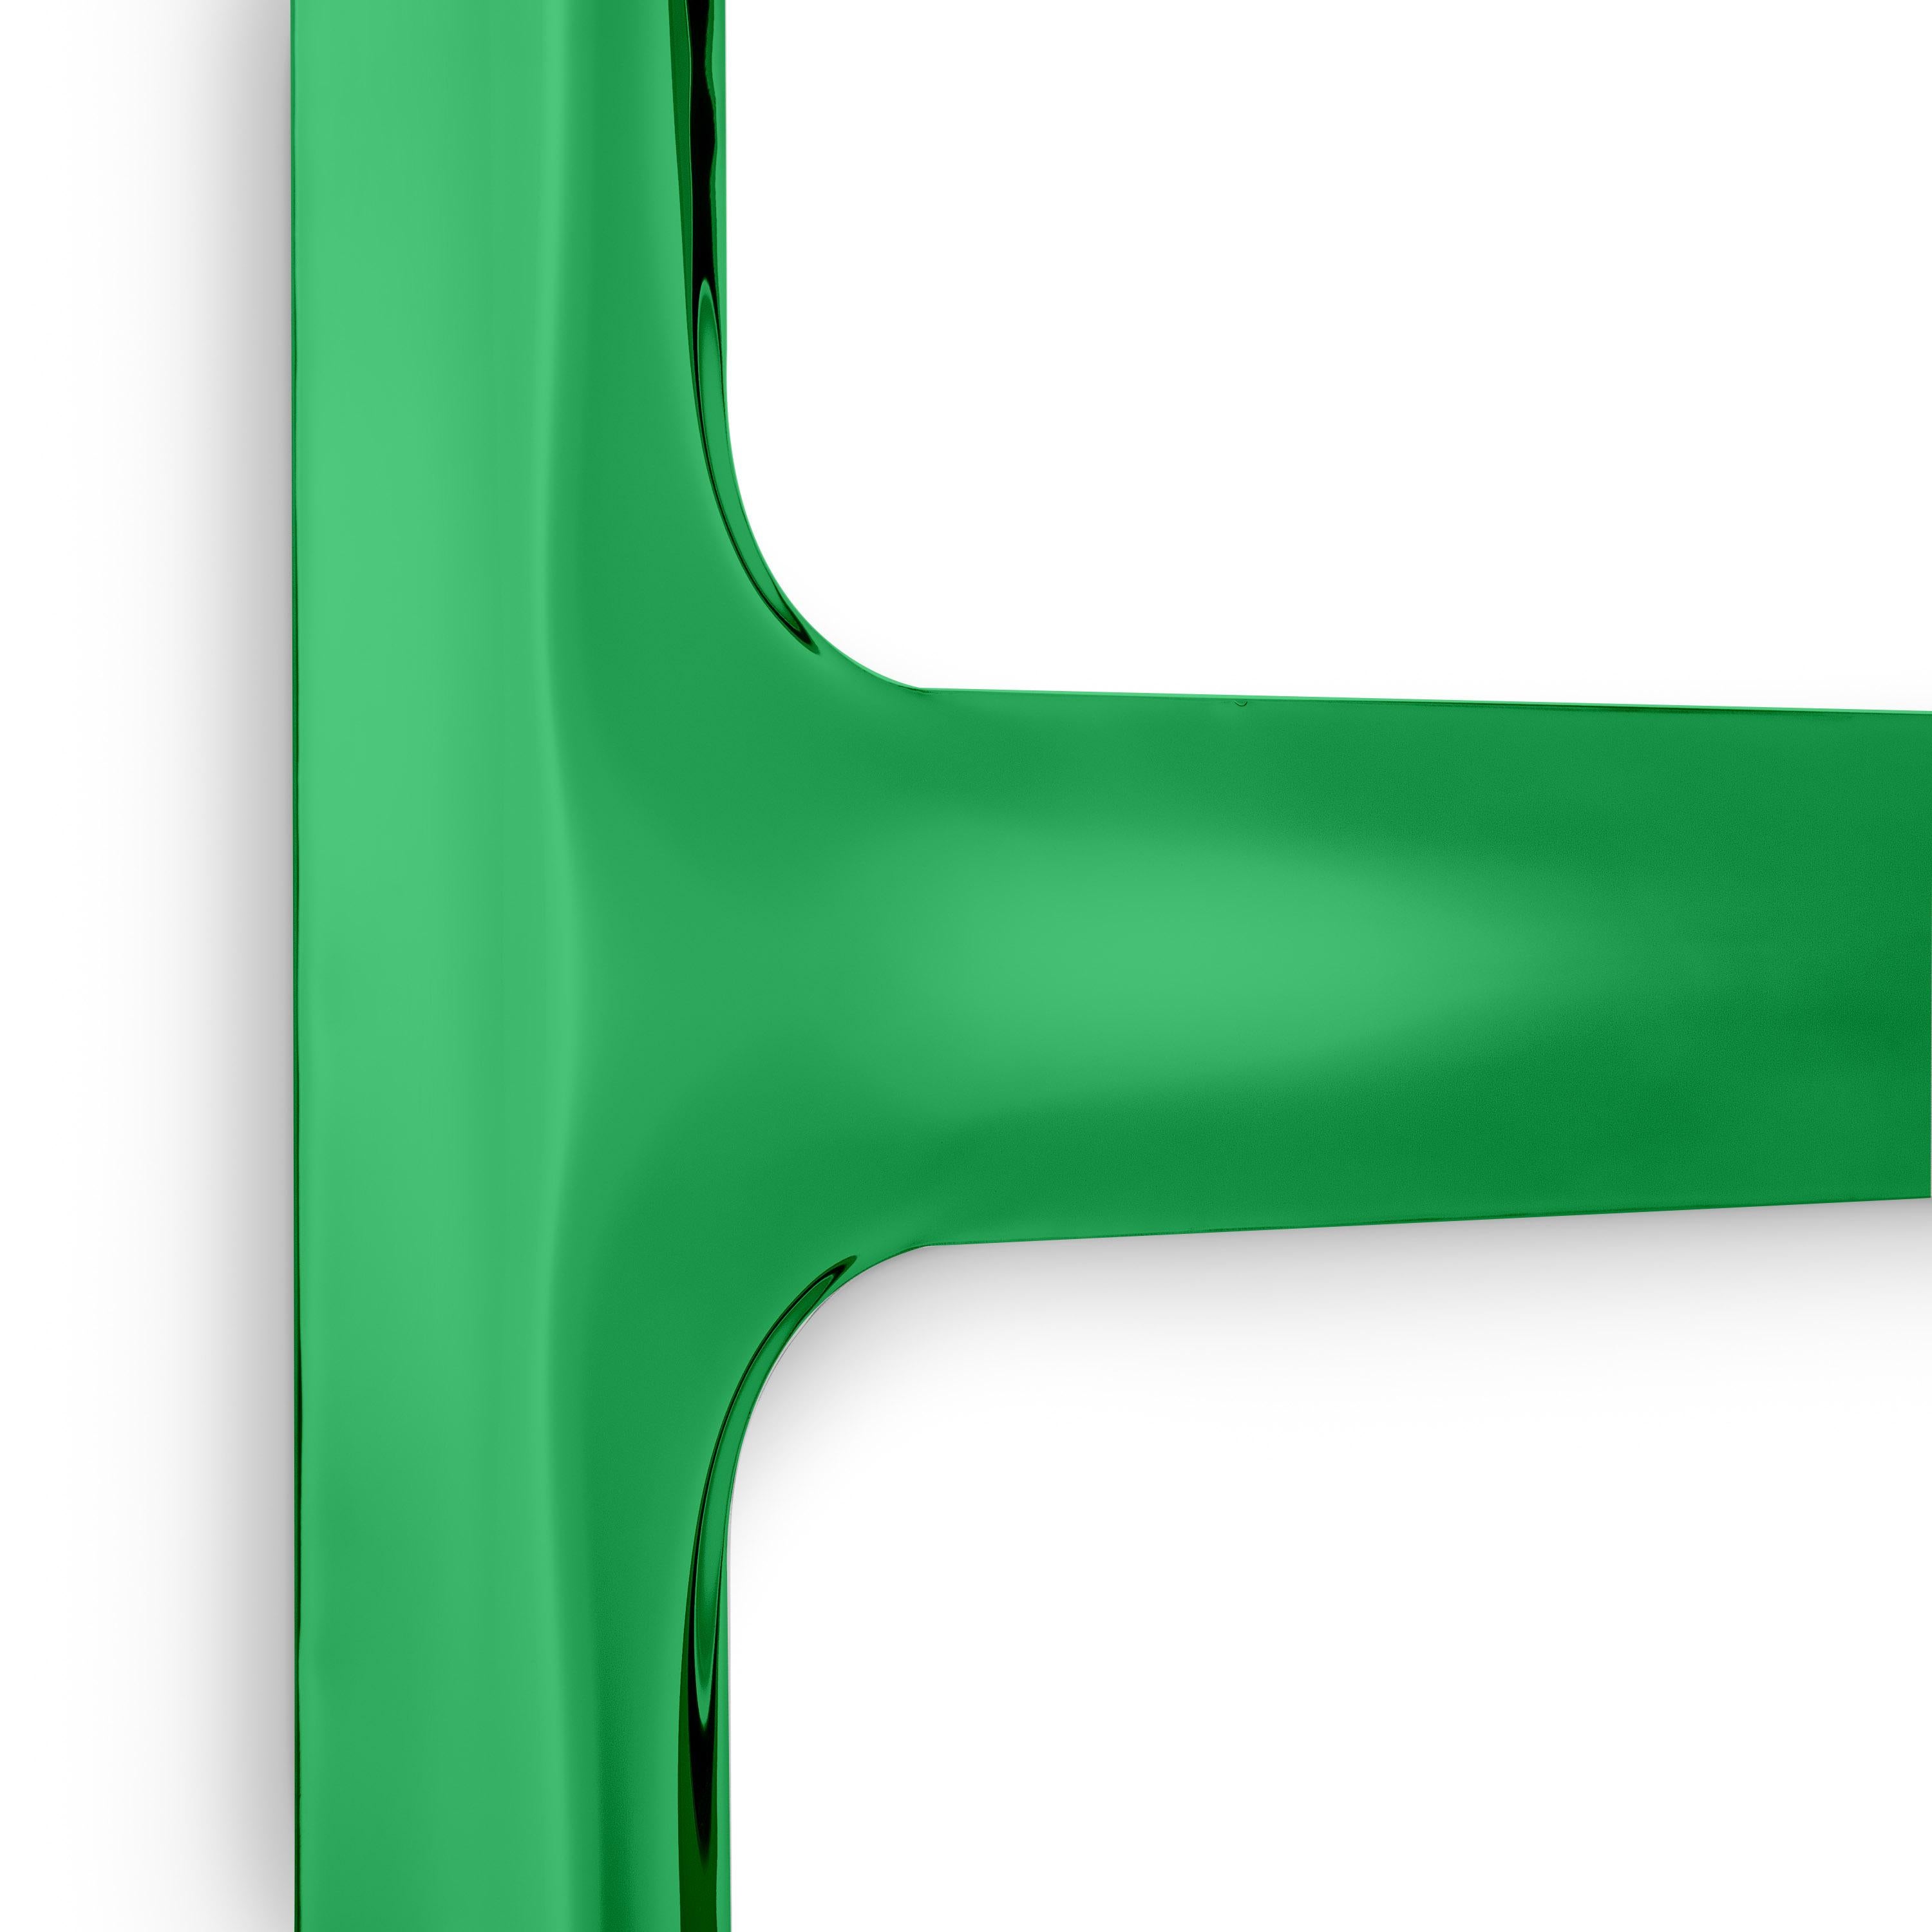 Polish Contemporary Hanger 'Drab', Gradient Collection, Emerald, by Zieta For Sale